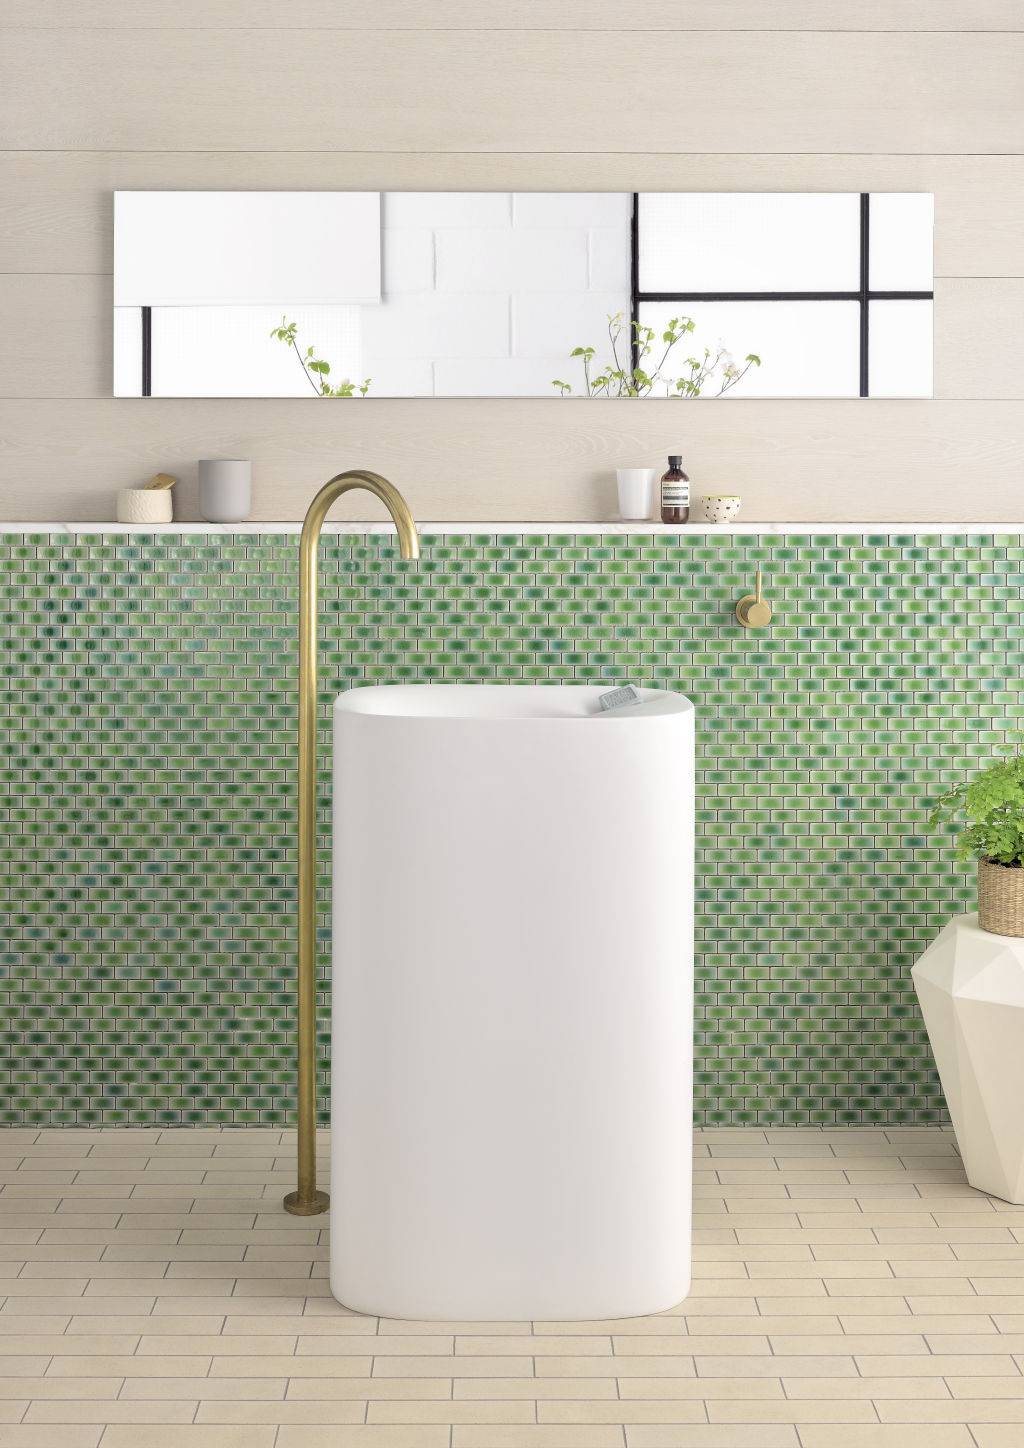 Five tiles to give your bathroom life